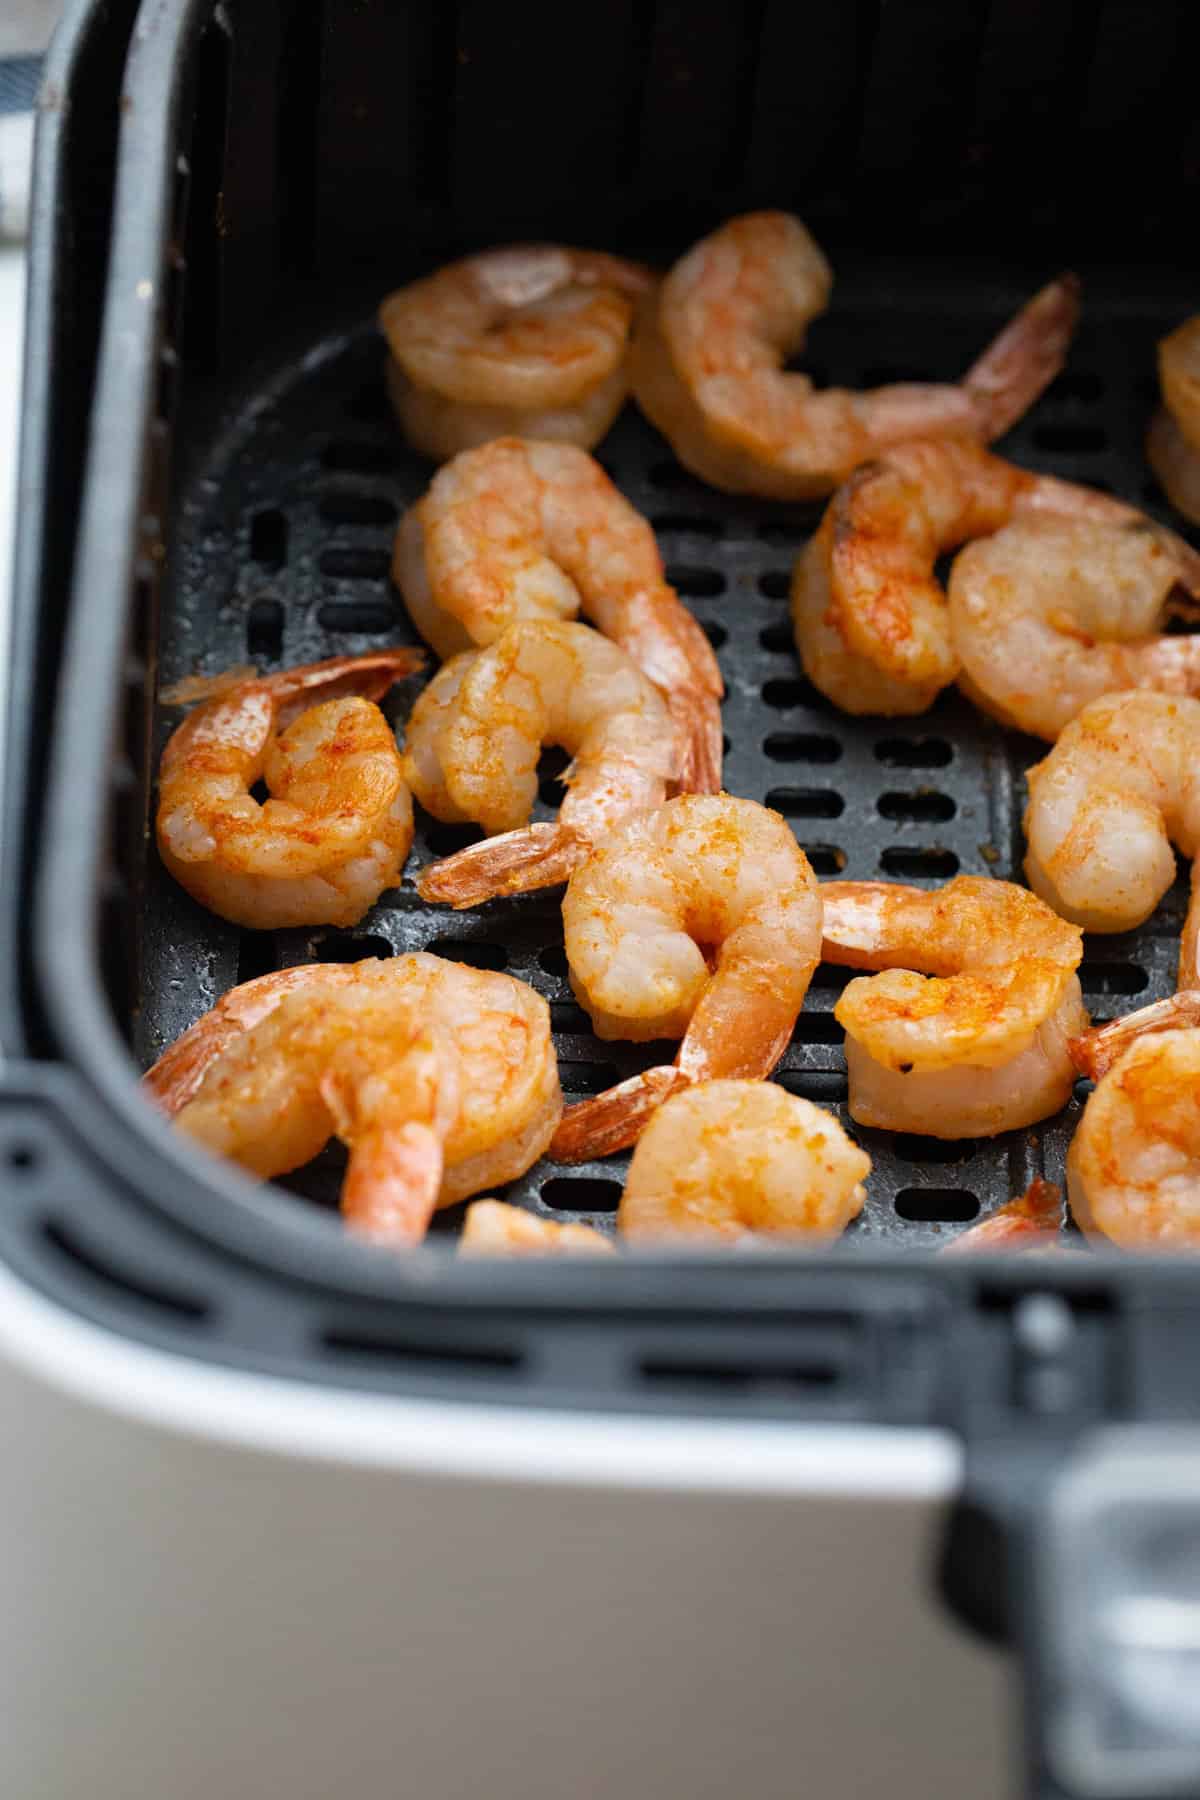 Cooked shrimp in an air fryer basket.